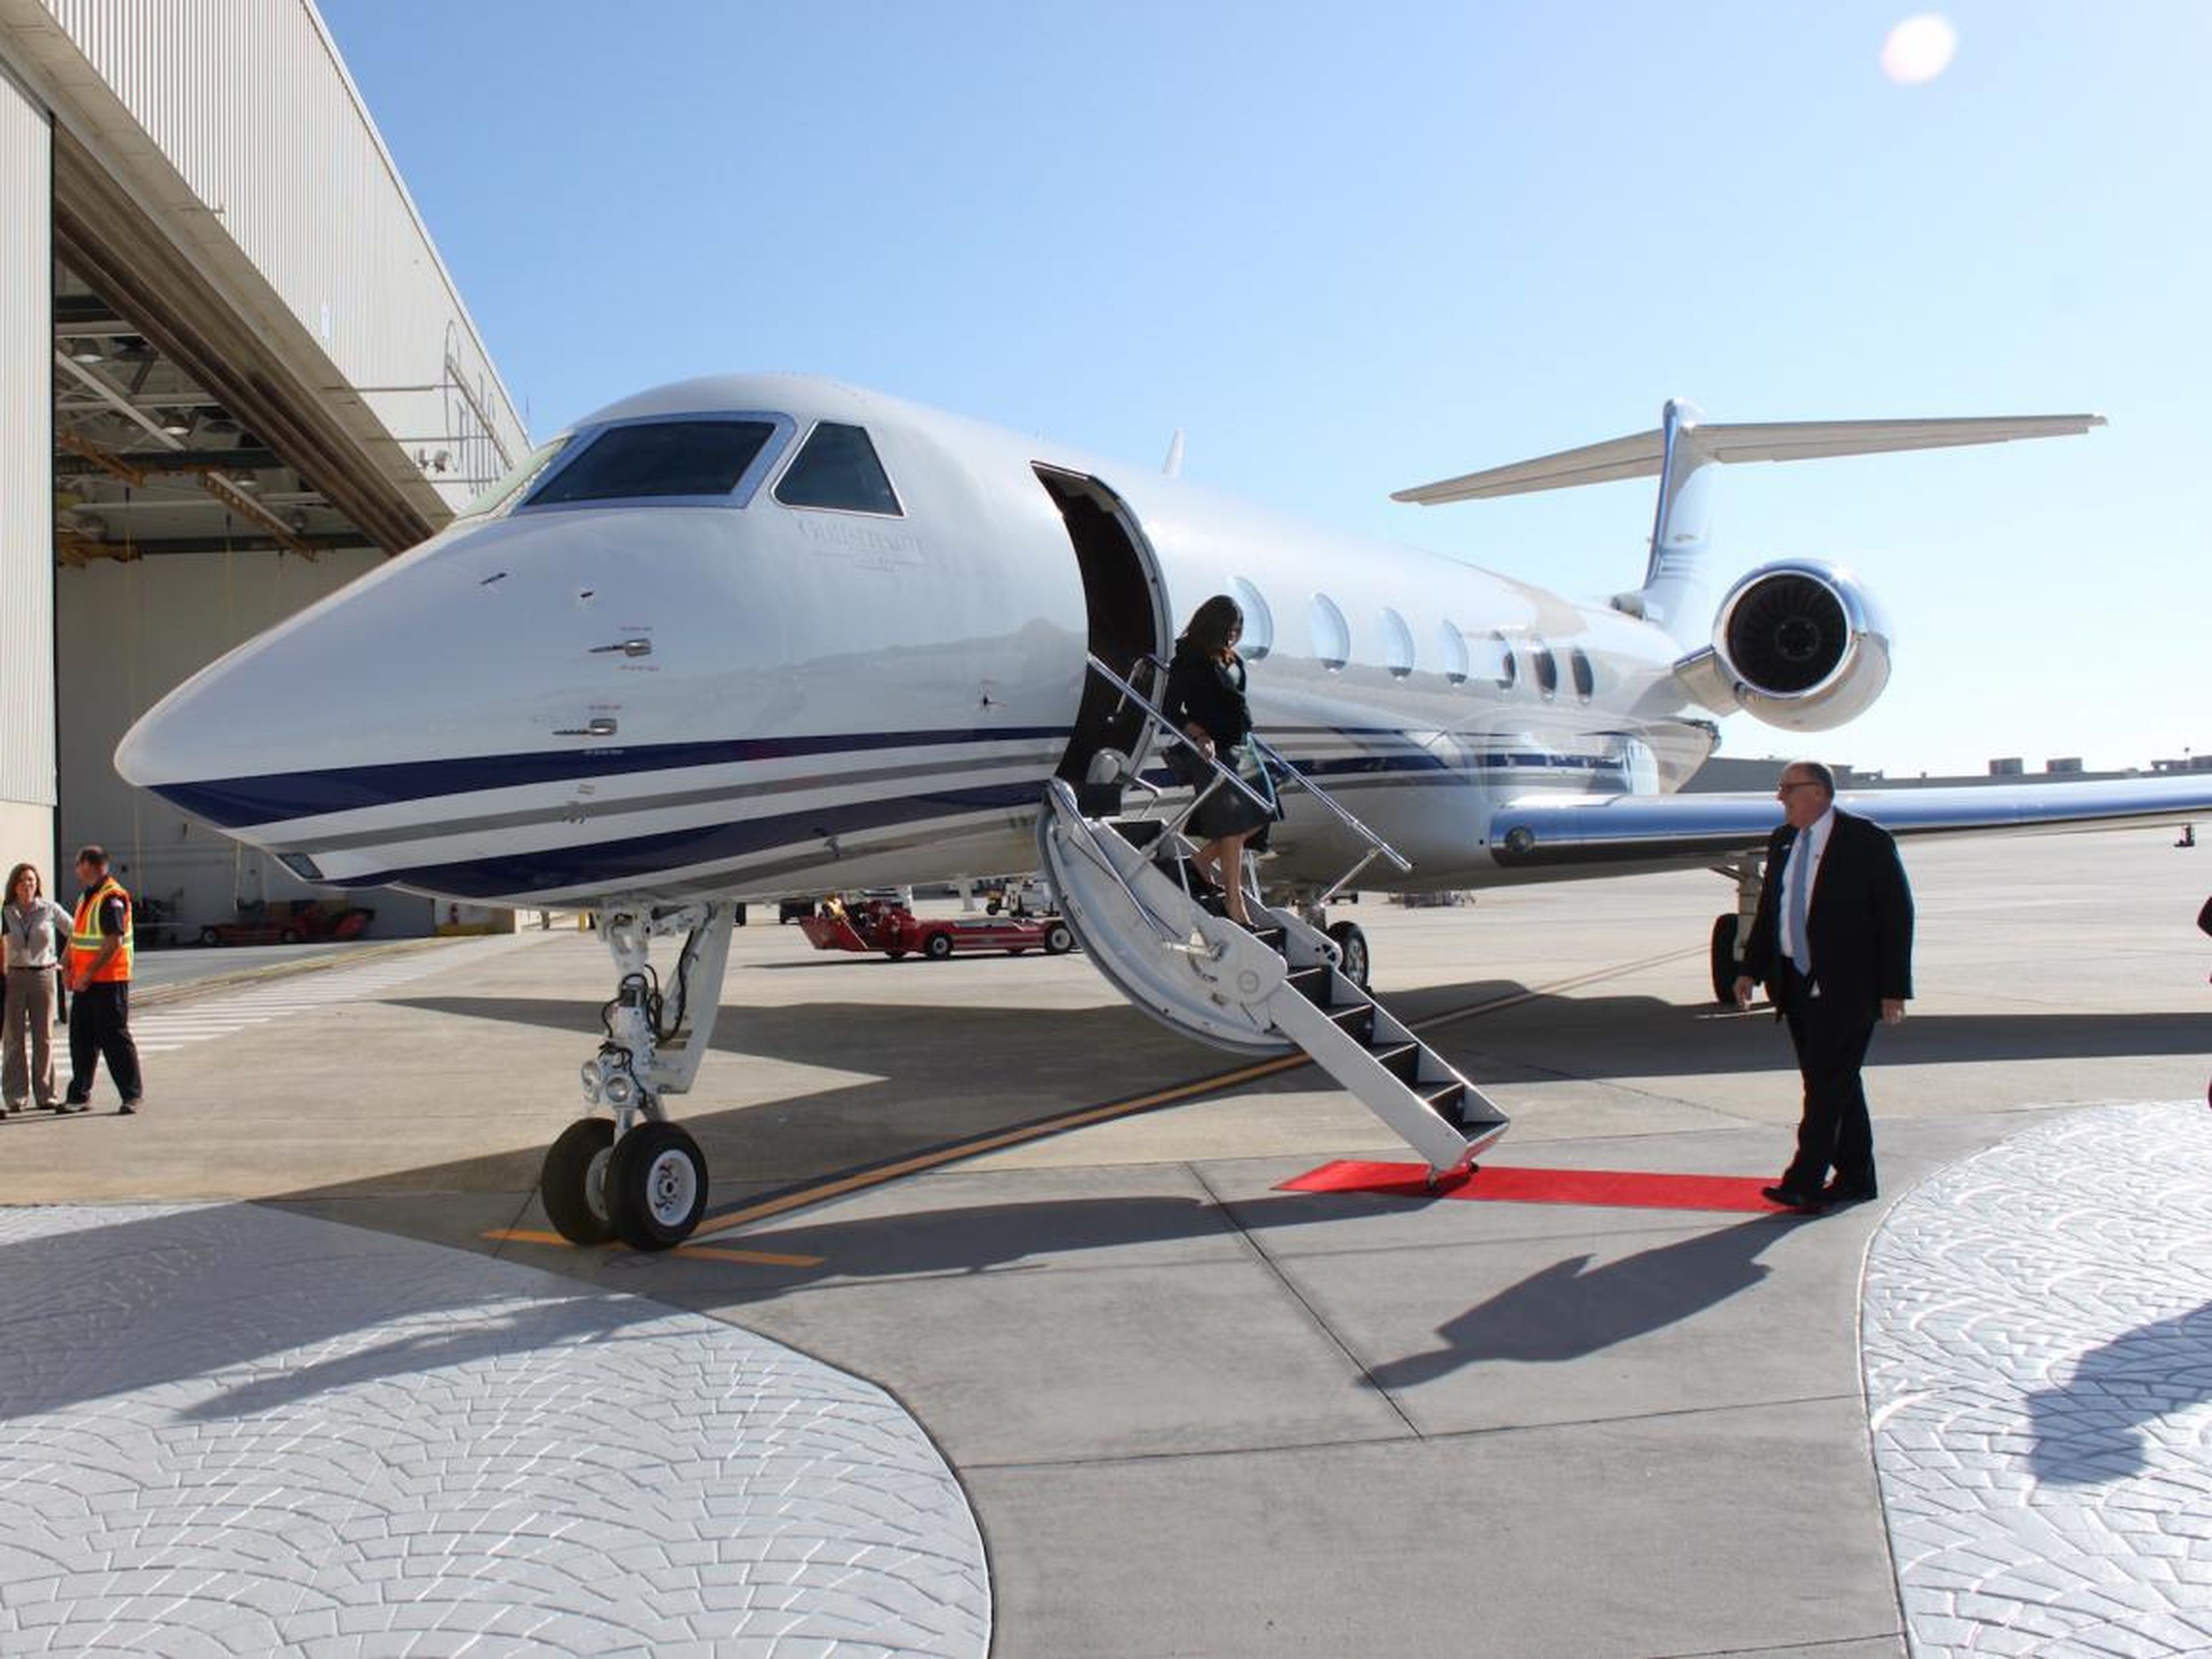 In 2016, Business Insider reporter Benjamin Zhang flew on a Gulfstream G550, the company's $61.5 former flagship model until the introduction of the larger $66.8 million G650 in 2012.